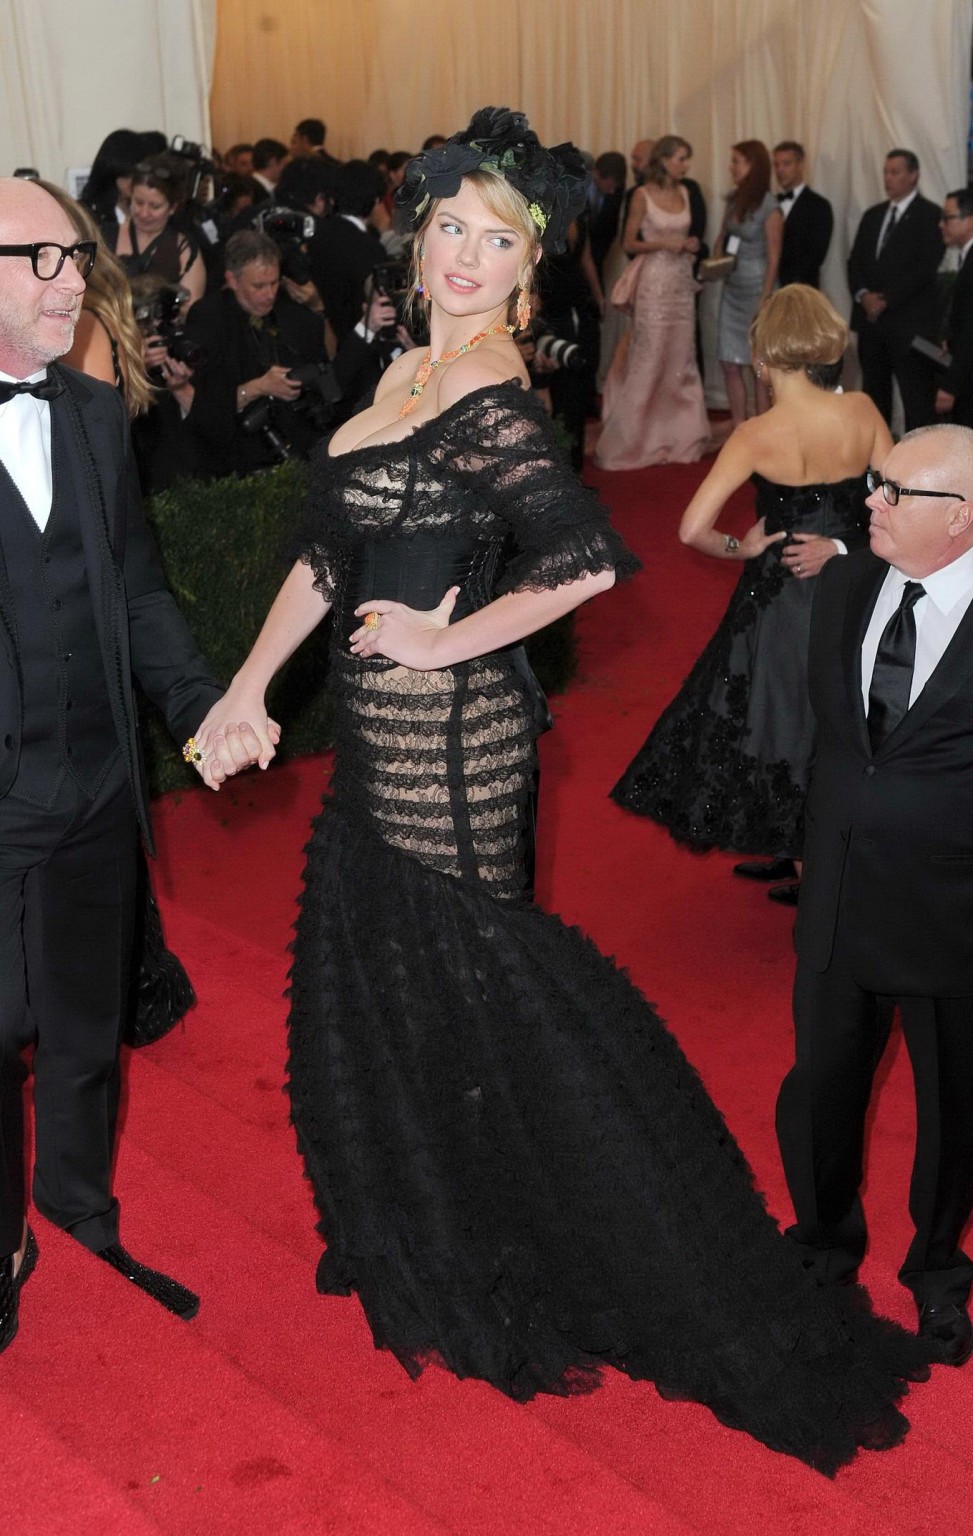 Busty Kate Upton showing cleavage at the 2014 Met Gala in NY #75197362